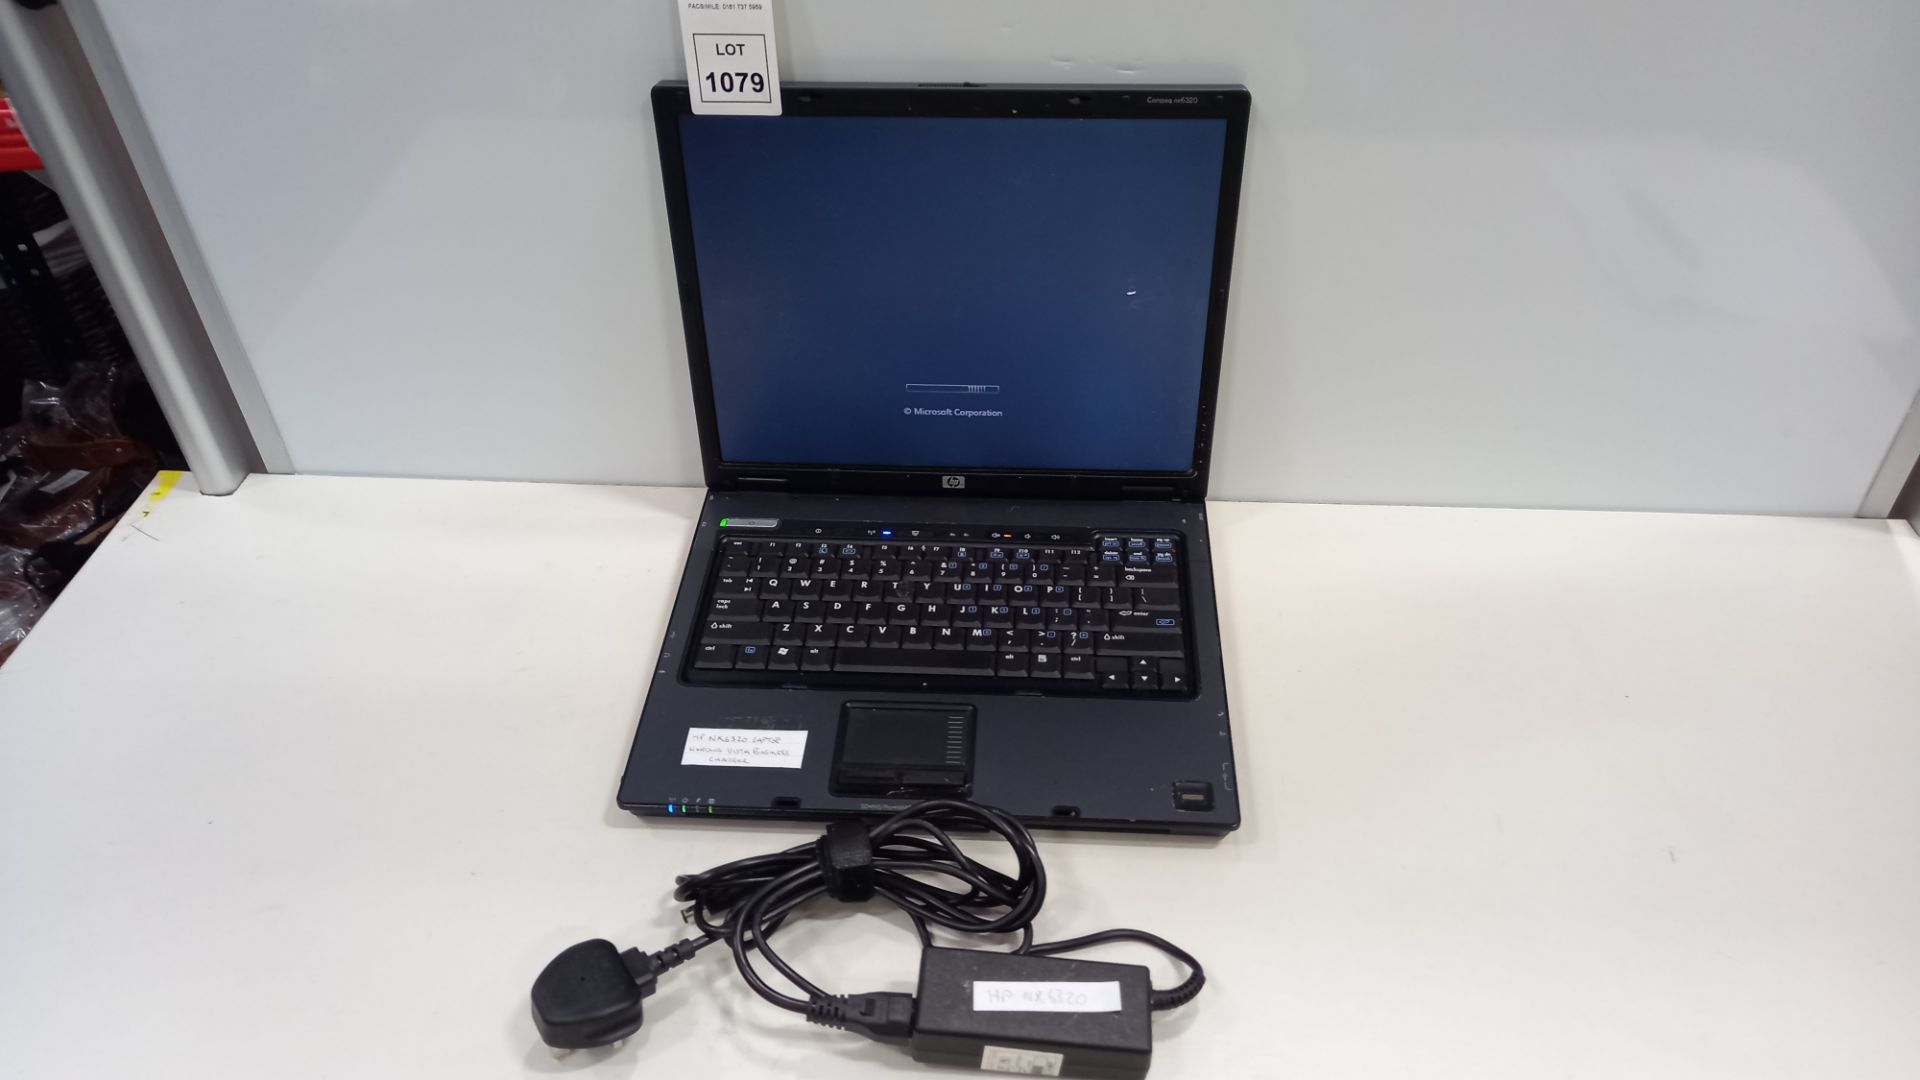 HP NX6320 LAPTOP WINDOWS VISTA BUSINESS - WITH CHARGER